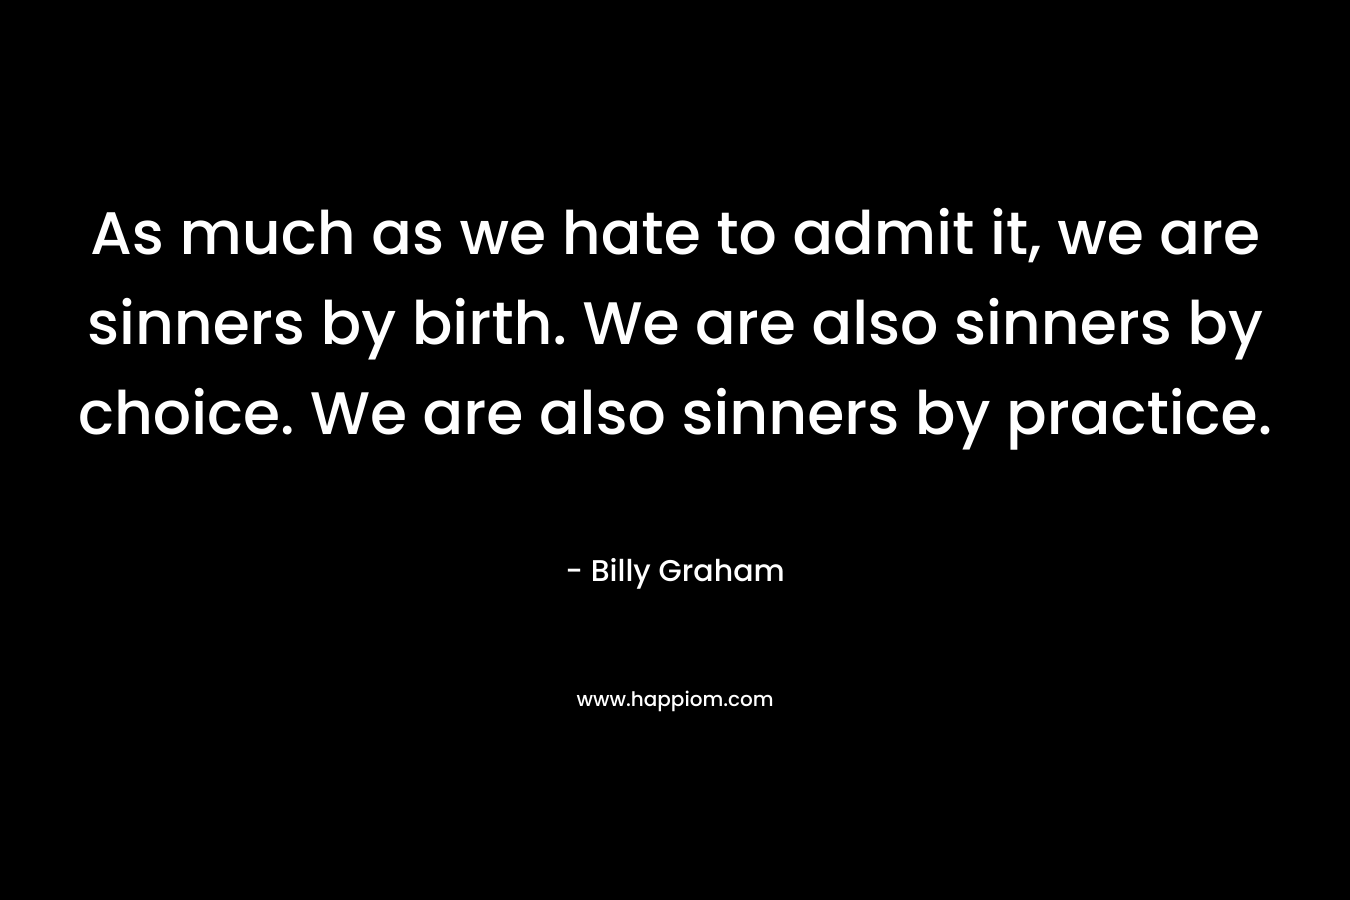 As much as we hate to admit it, we are sinners by birth. We are also sinners by choice. We are also sinners by practice.